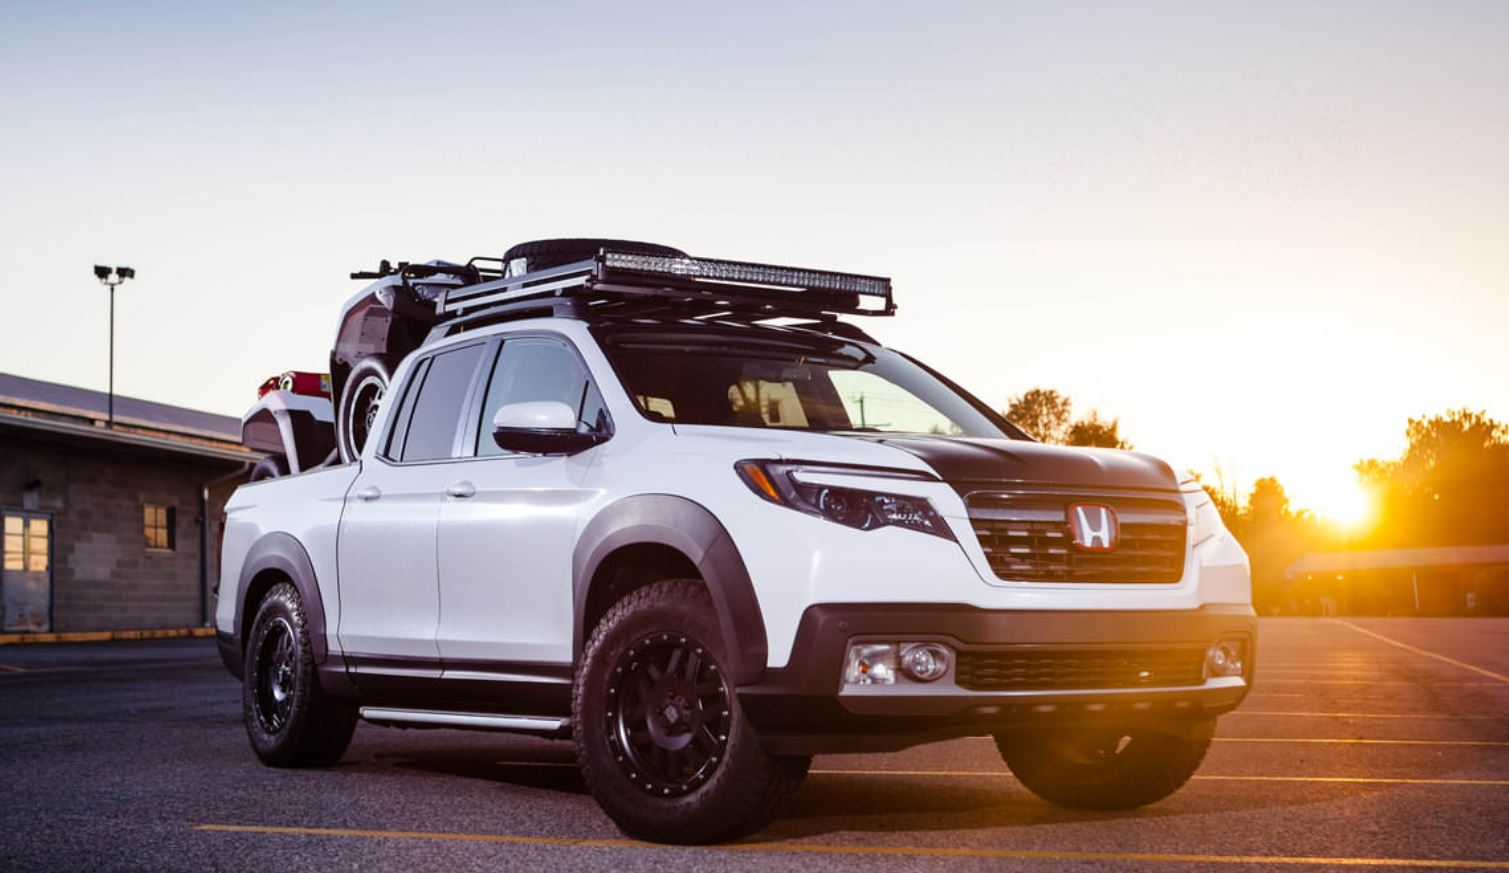 A custom white Honda Ridgeline has had some offroad upgrades, like fender flares, a roof rack, and a lift kit.